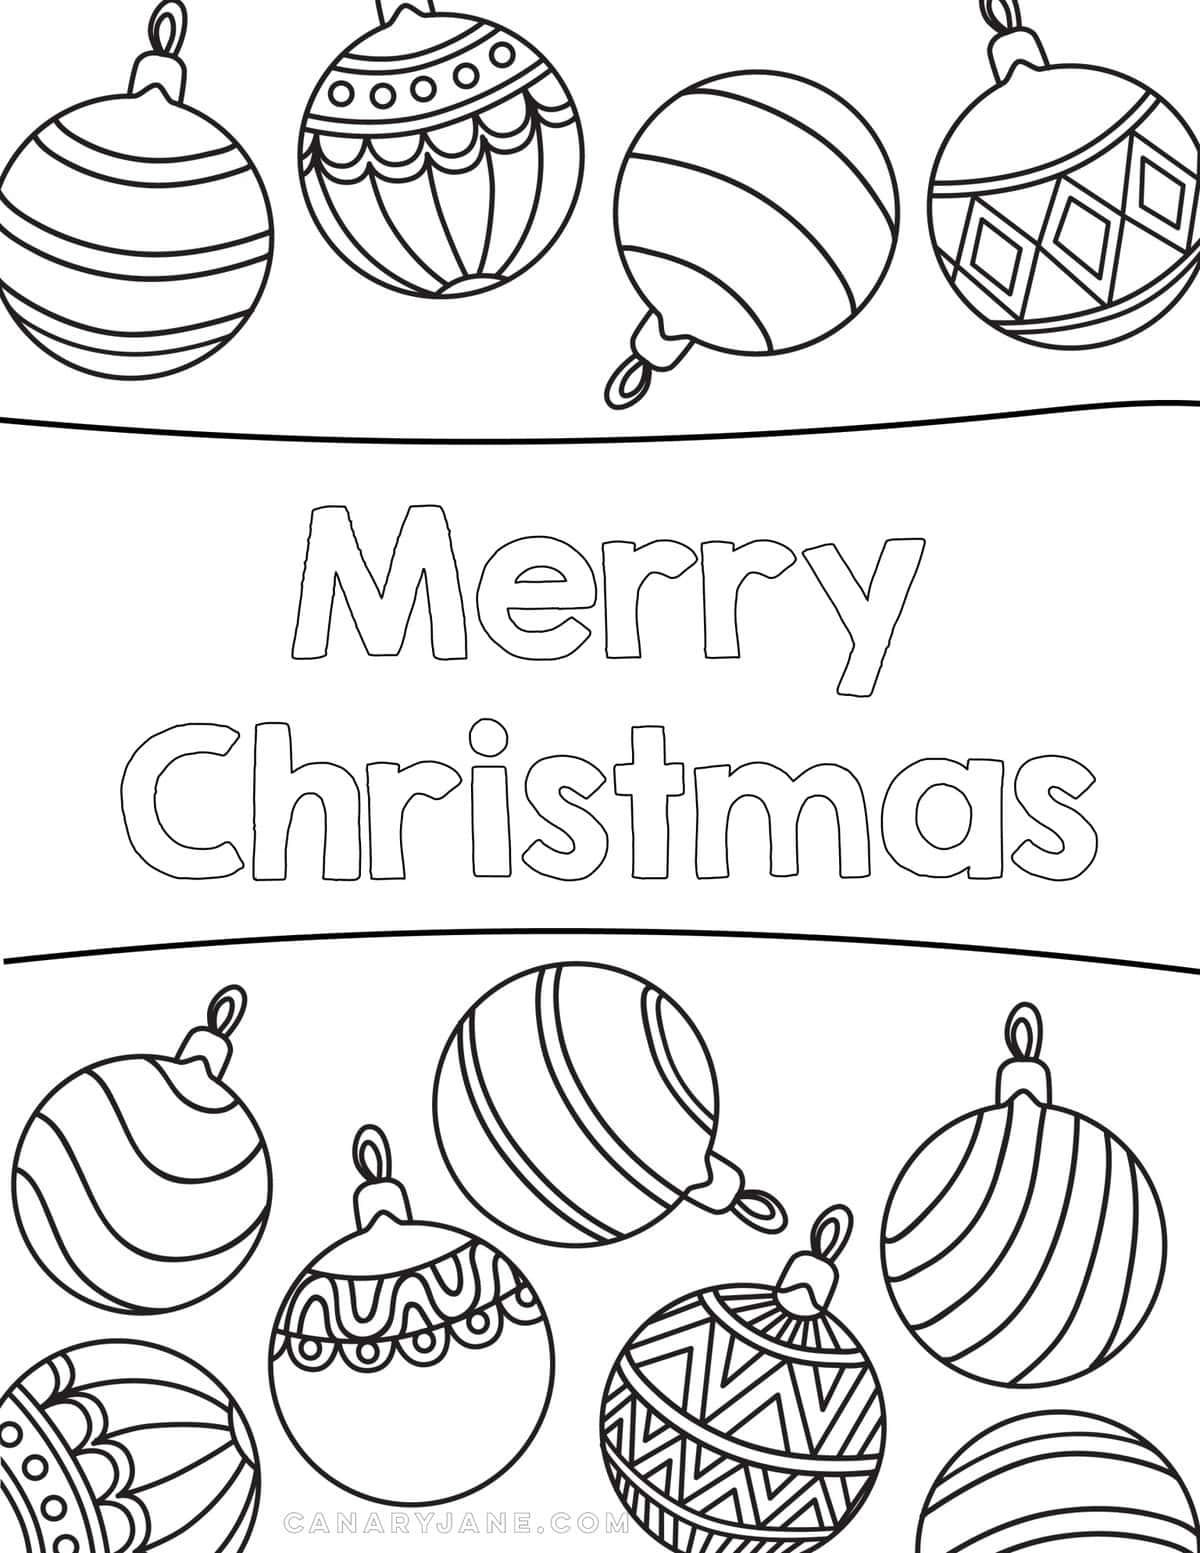 Free Christmas Coloring Pages & Printables Design Dazzle